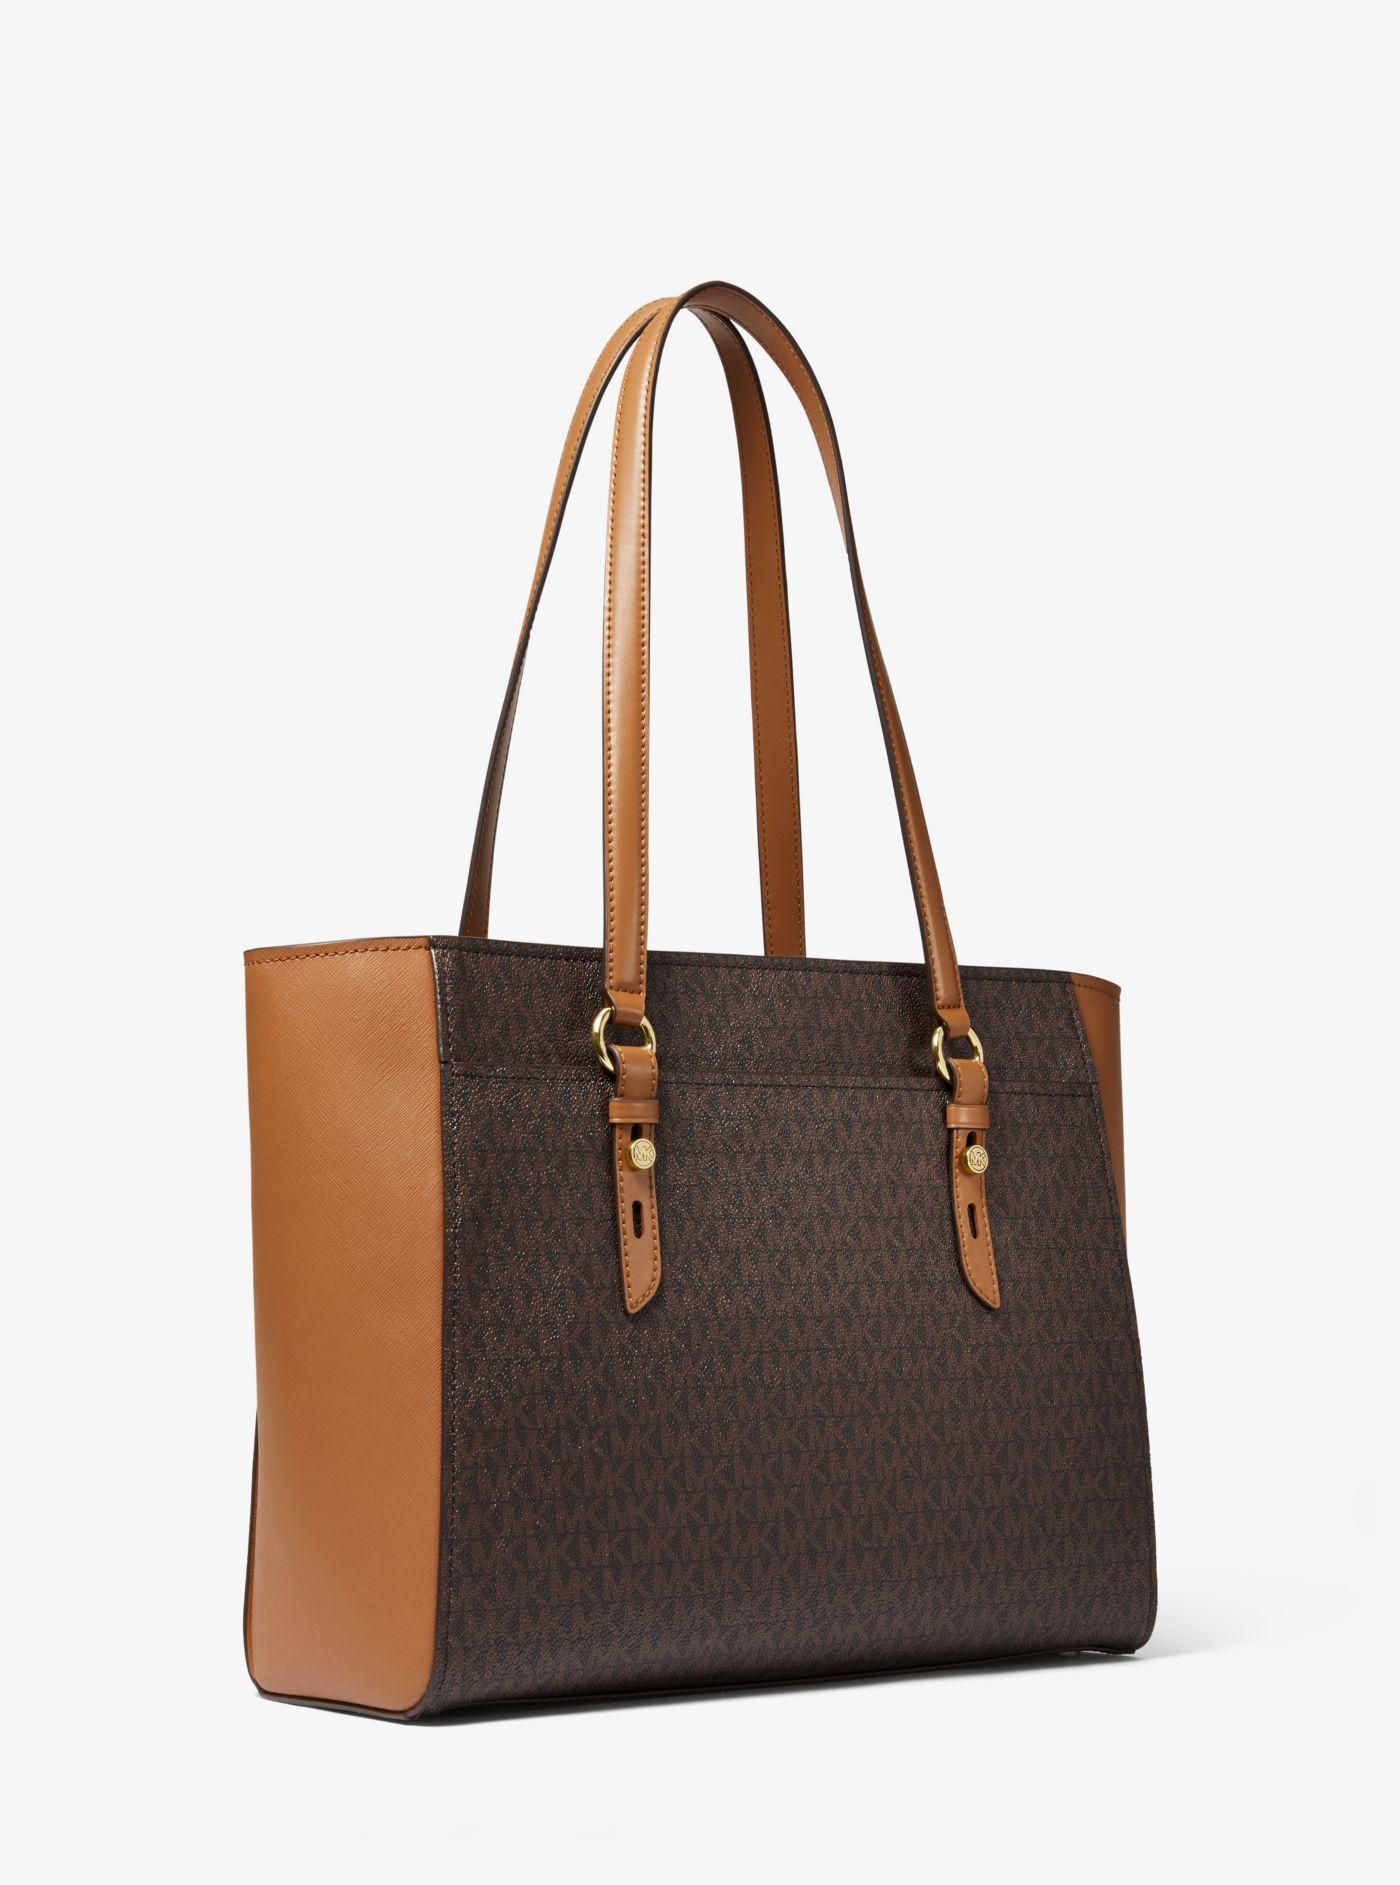 Michael Kors Sullivan Large Logo And Leather Tote Bag in Brown - Lyst